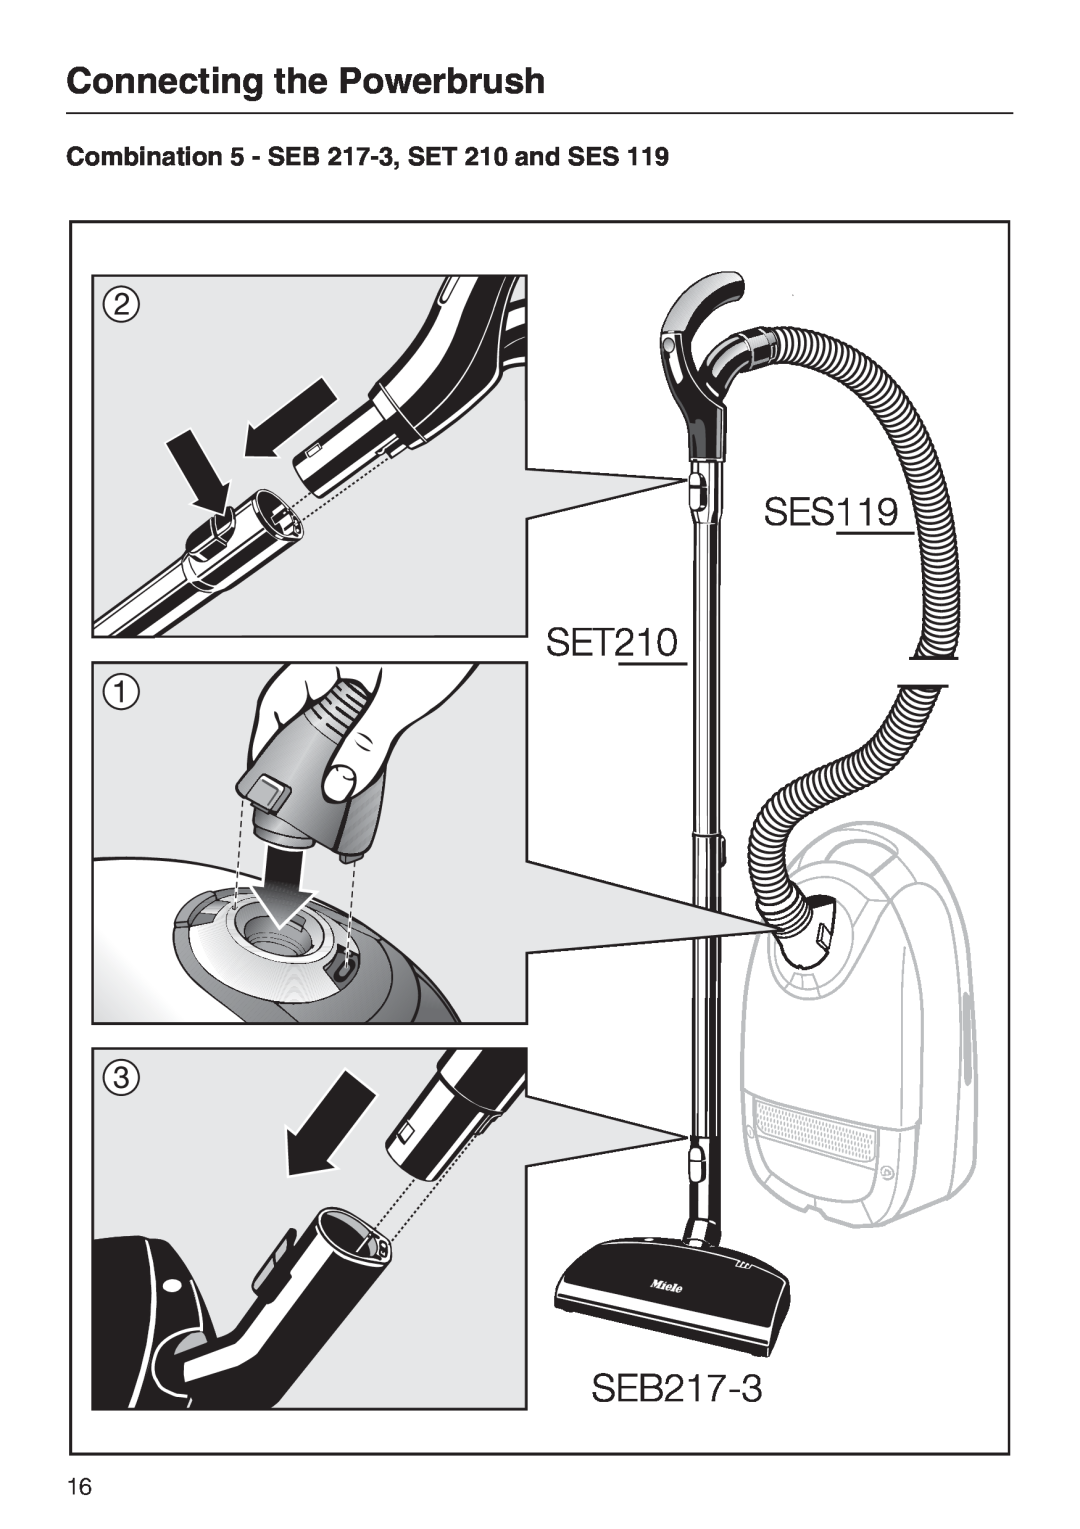 Miele 217-2, 213-2 operating instructions Connecting the Powerbrush, Combination 5 - SEB 217-3,SET 210 and SES 